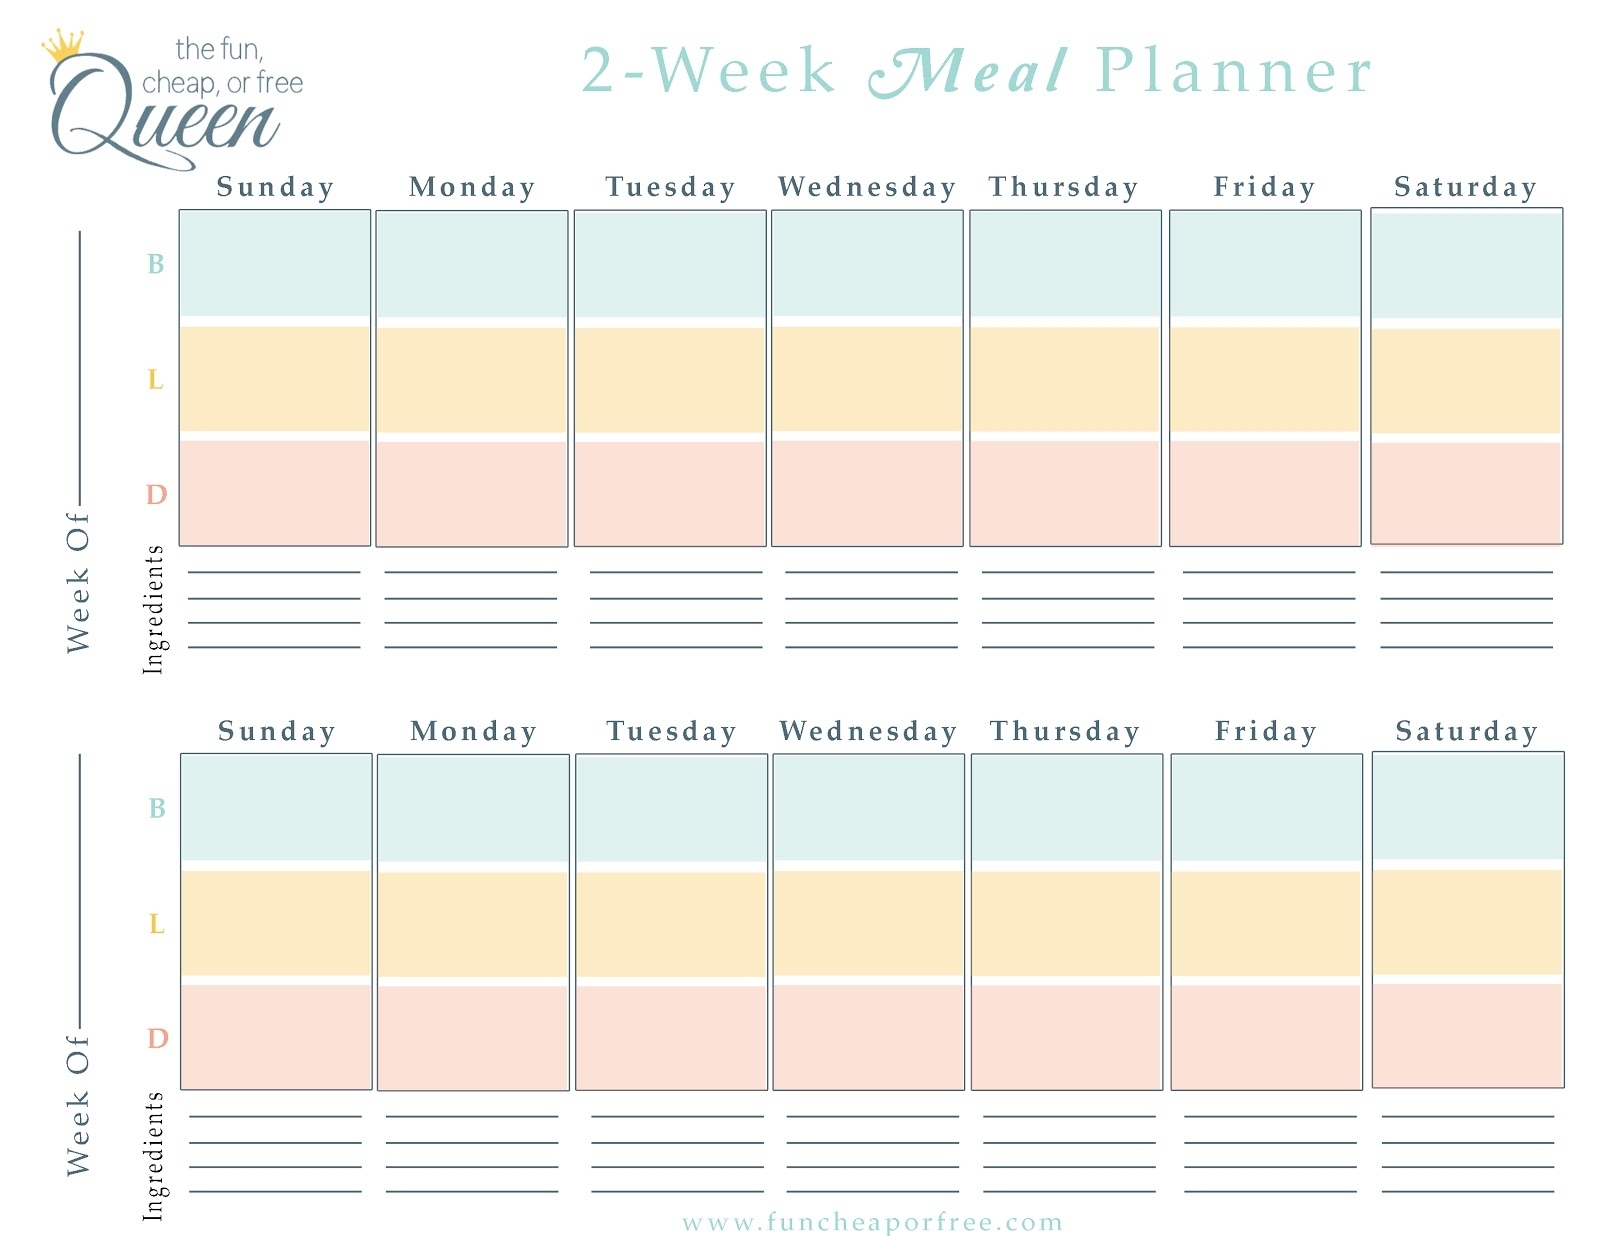 Easy Meal Plan Structure With Free Printables! - Fun Cheap Or Free within Monthly 5 Week Menu Rotation Template